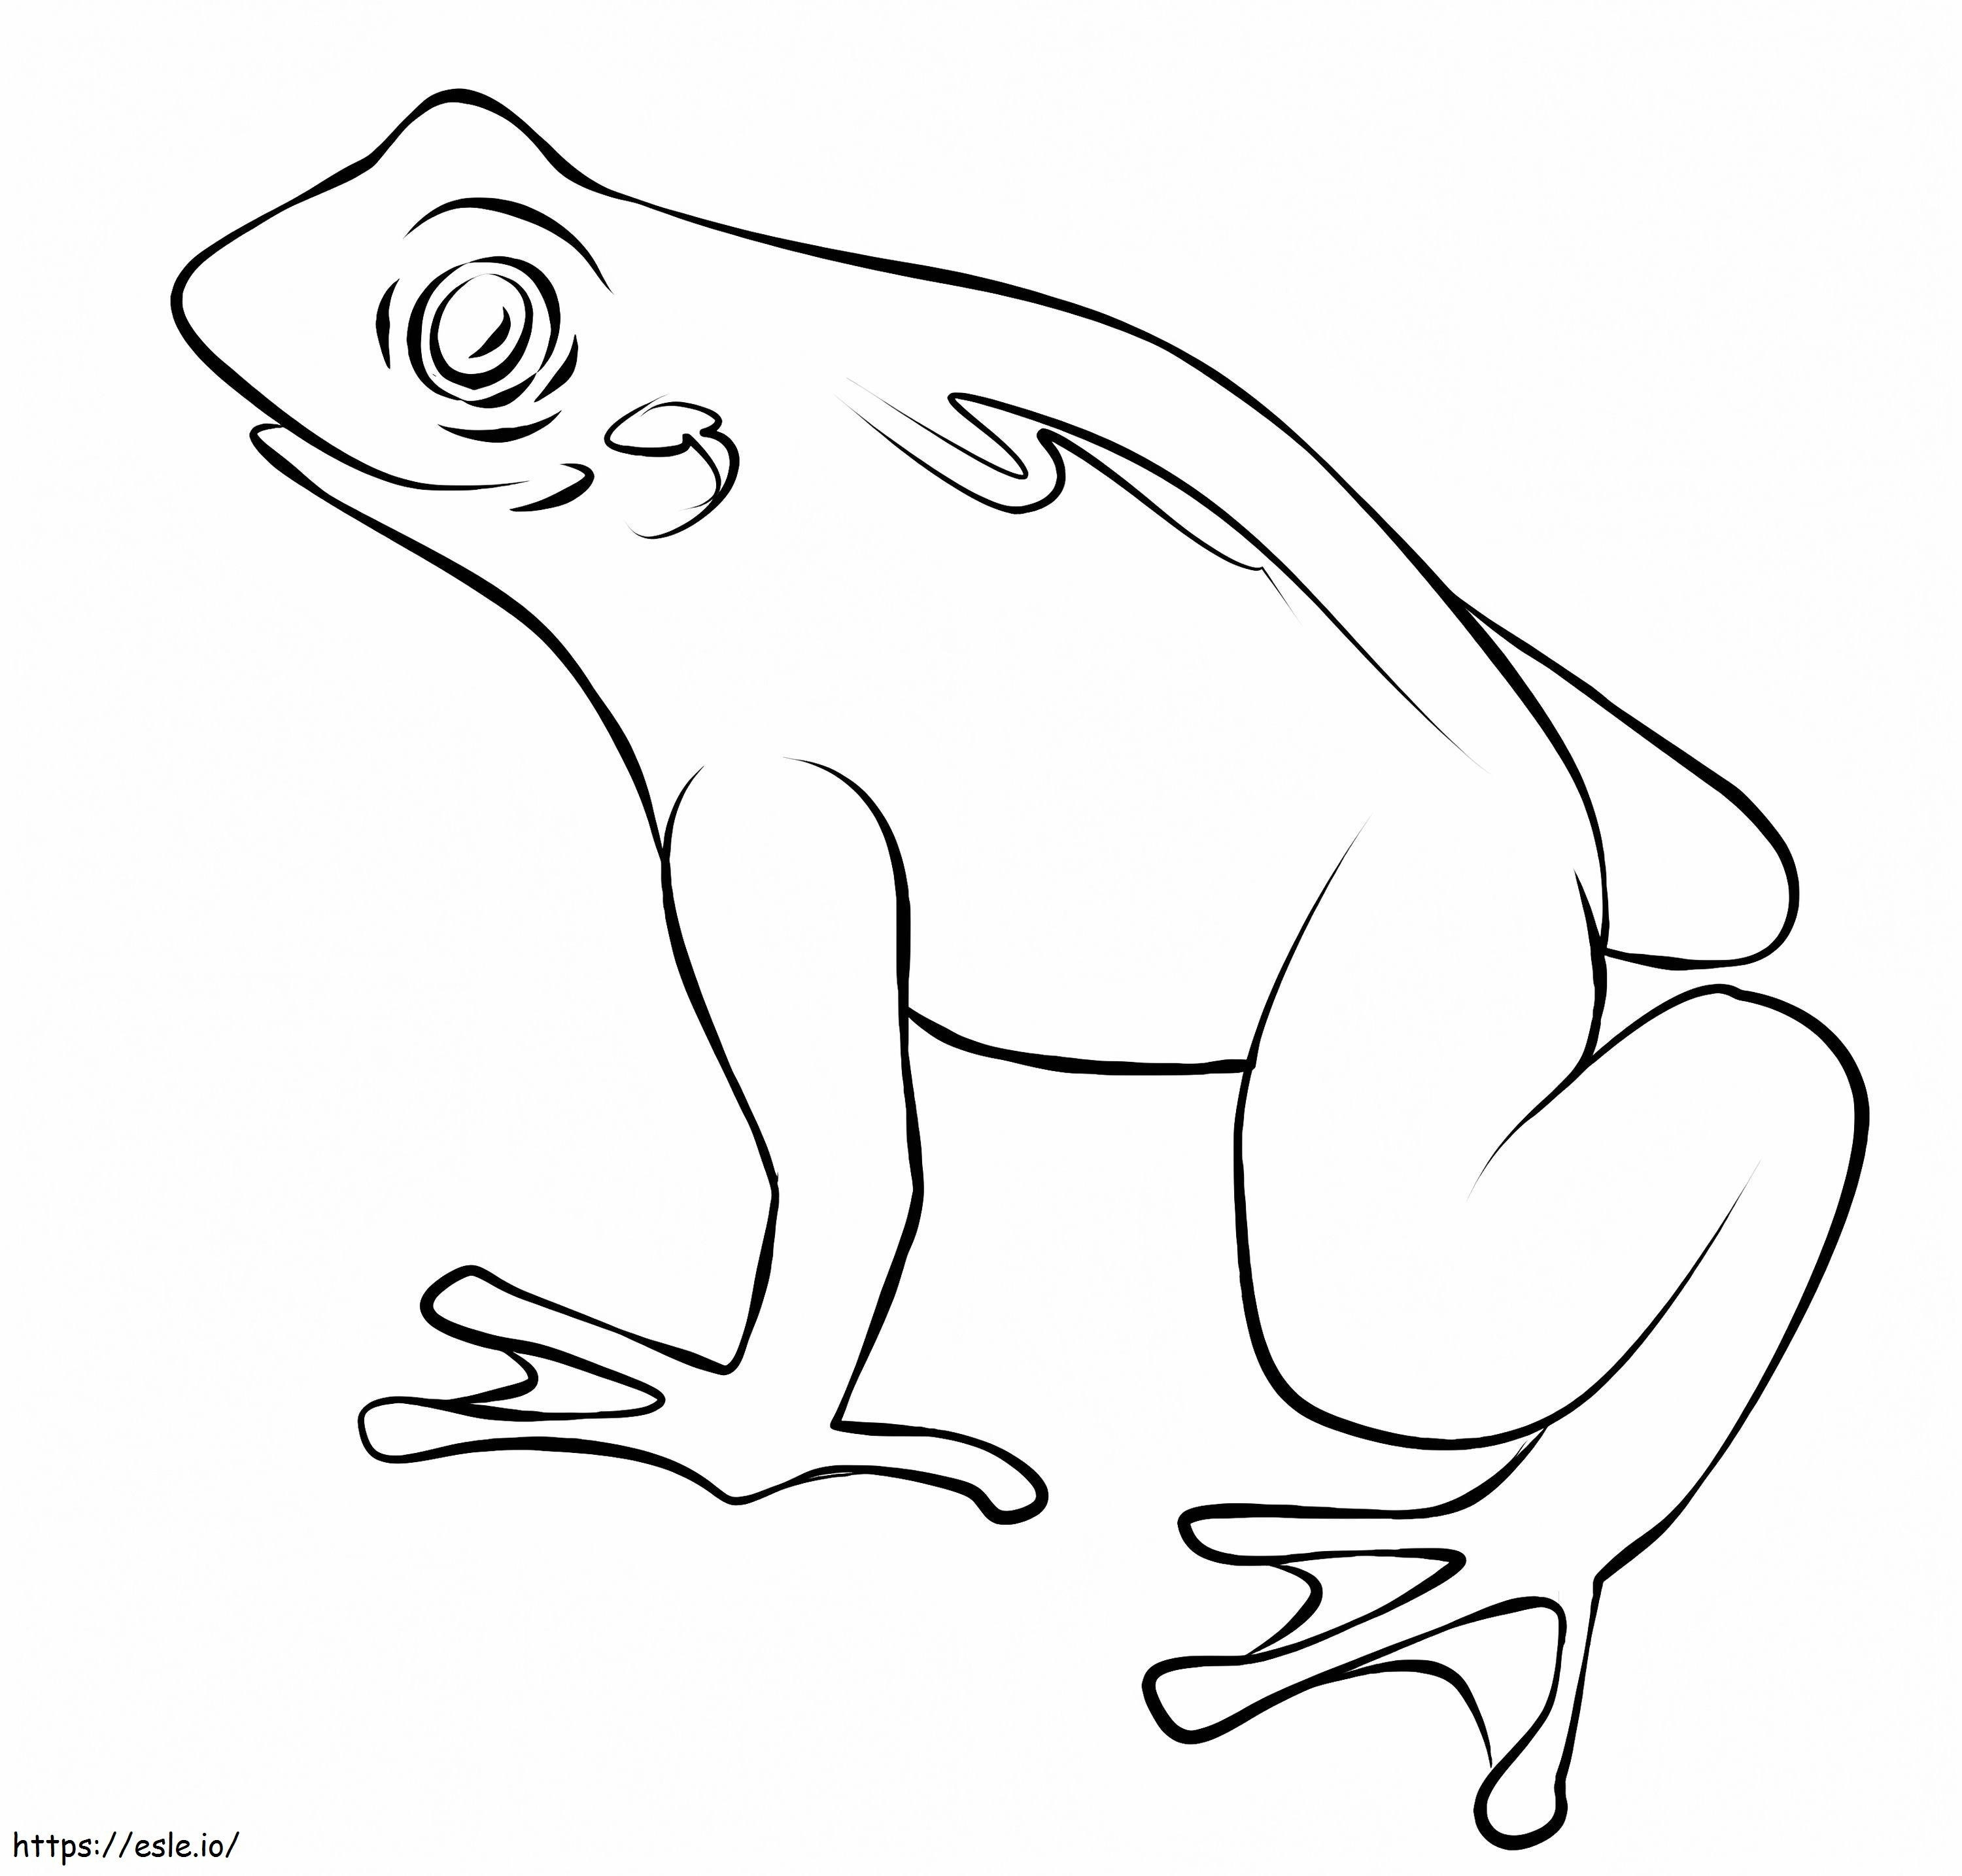 Smile Toad coloring page